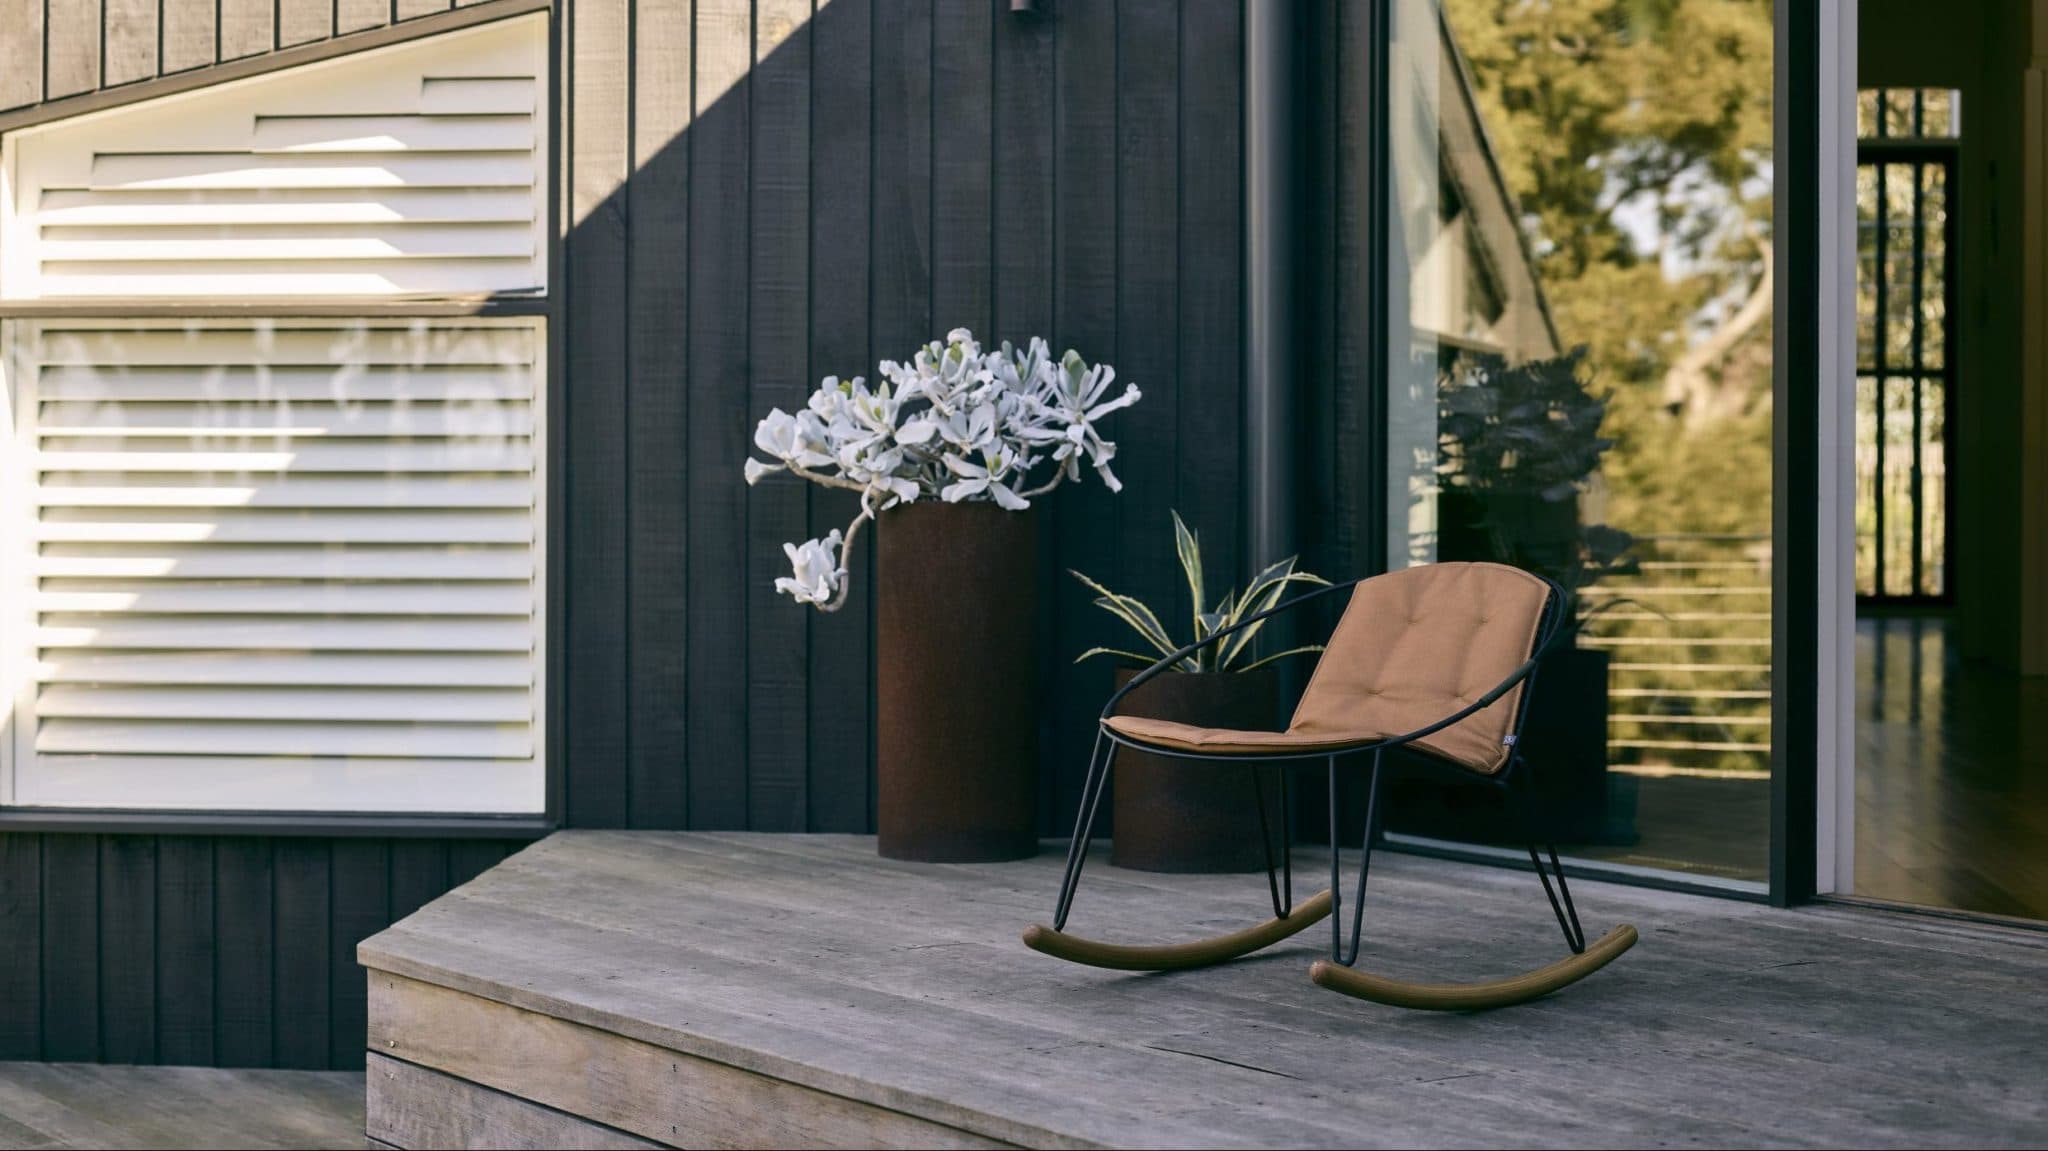 the Volley Rocker - a modern outdoor rocking chair with a distinct mid-century modern vibe designed by Adam Goodrum.